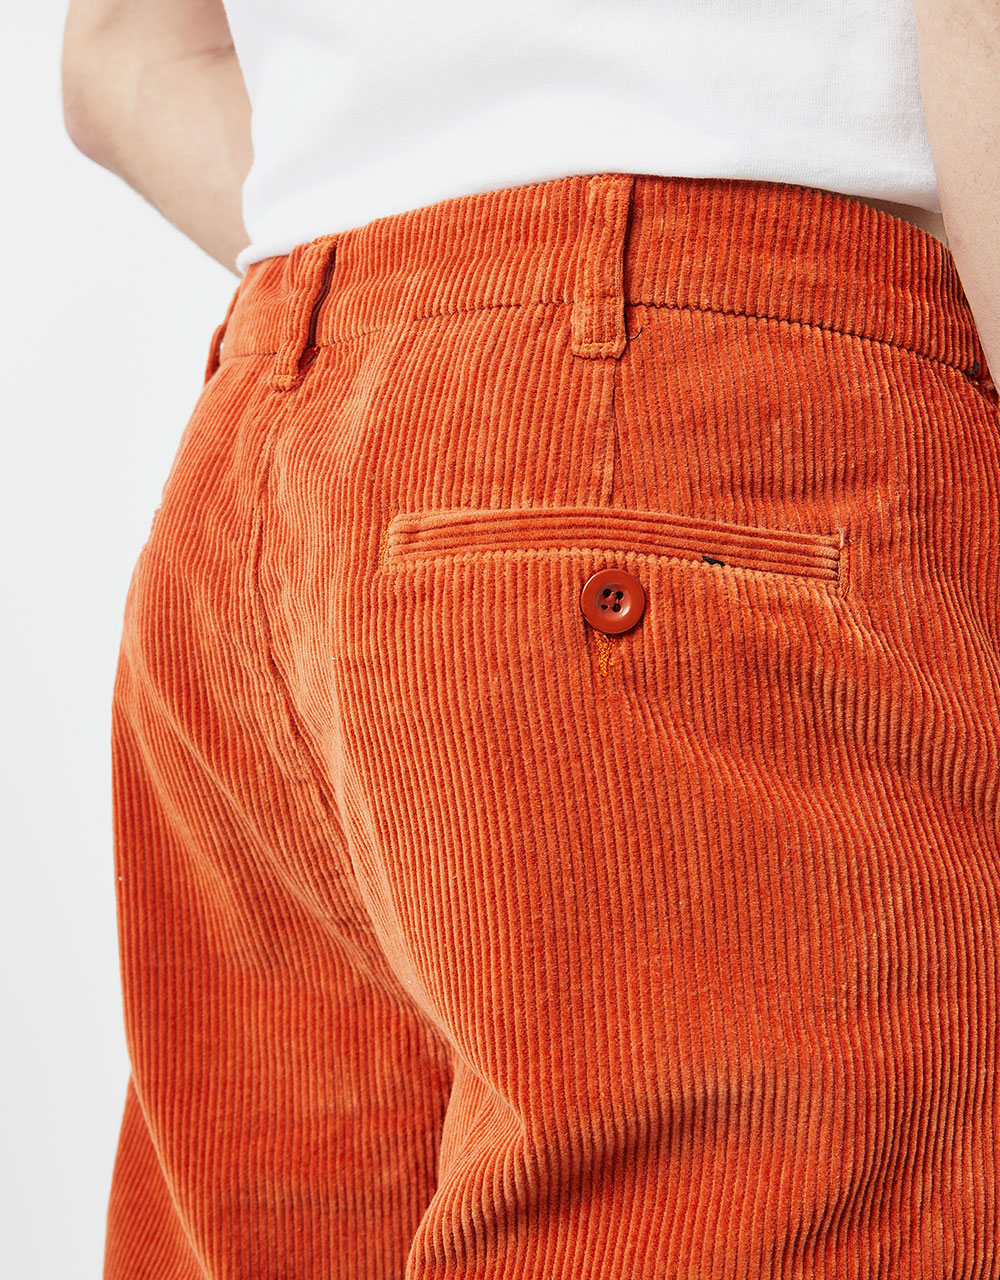 Route One Relaxed Fit Big Wale Cords - Rust